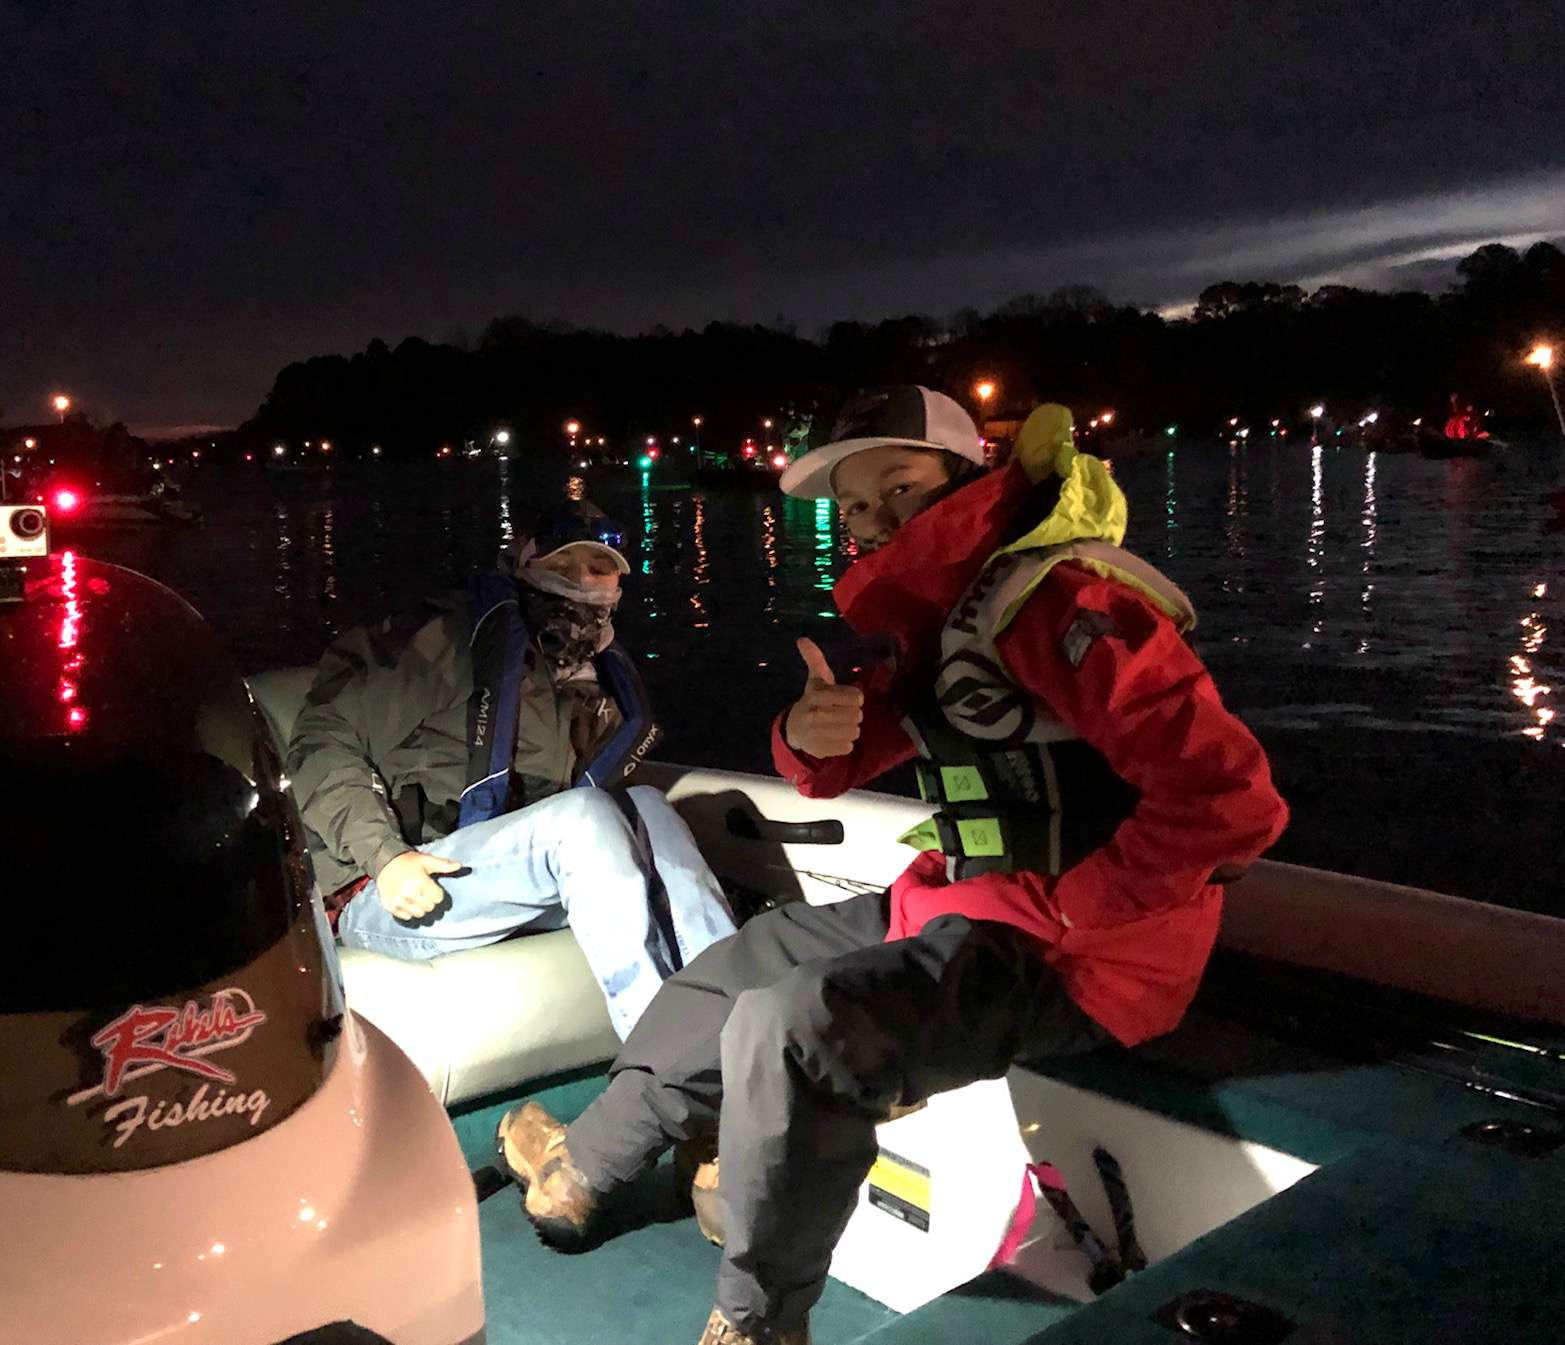 See the high school and junior anglers head out for the Mossy Oak Fishing Bassmaster High School Eastern Open presented by Academy Sports + Outdoors!